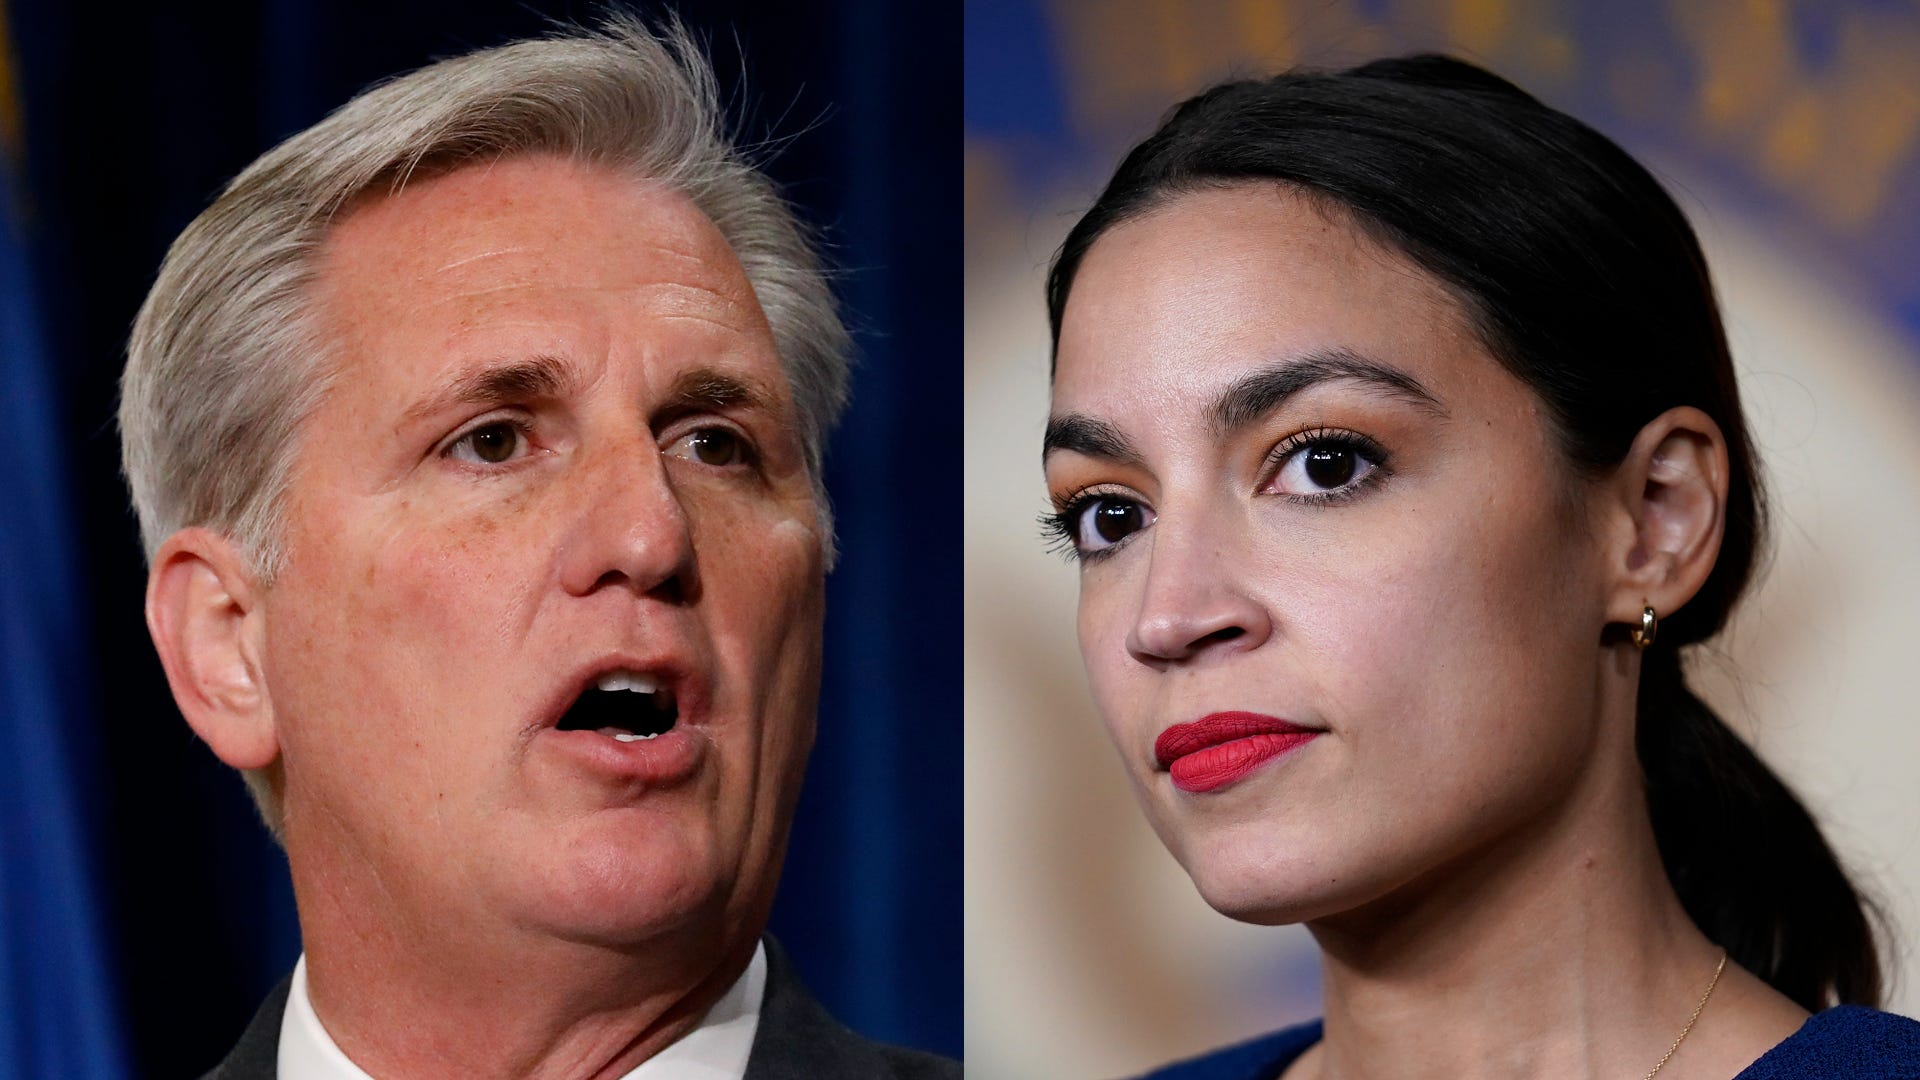 Close up images of Rep. Kevin McCarthy and Rep. Alexandria Ocasio-Cortez side by side.